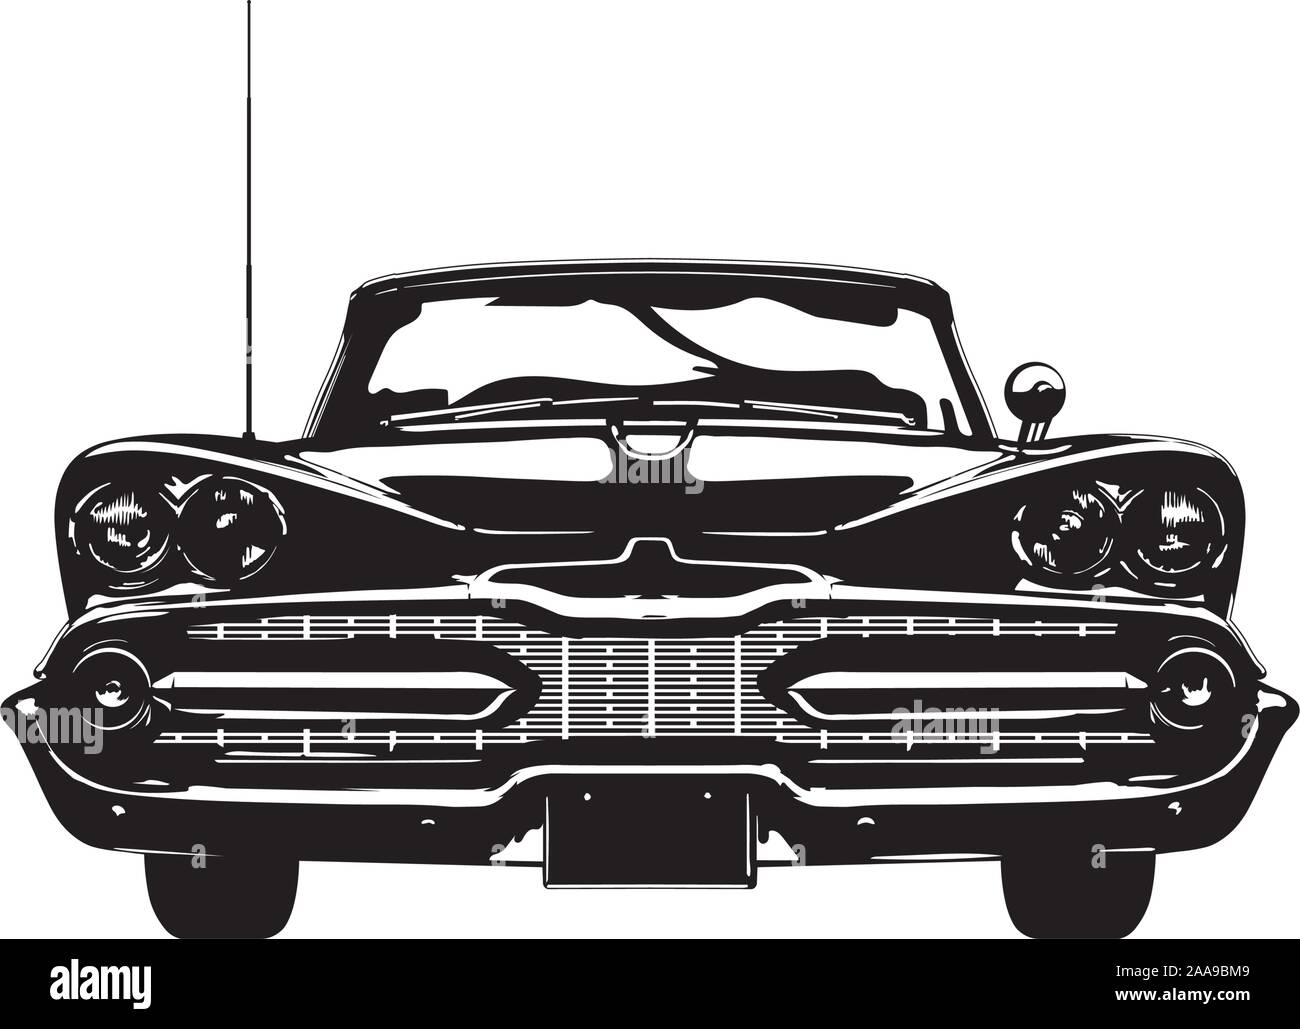 Frontal view of a vintage american car, late 1950s, silhouette vector illustration Stock Vector